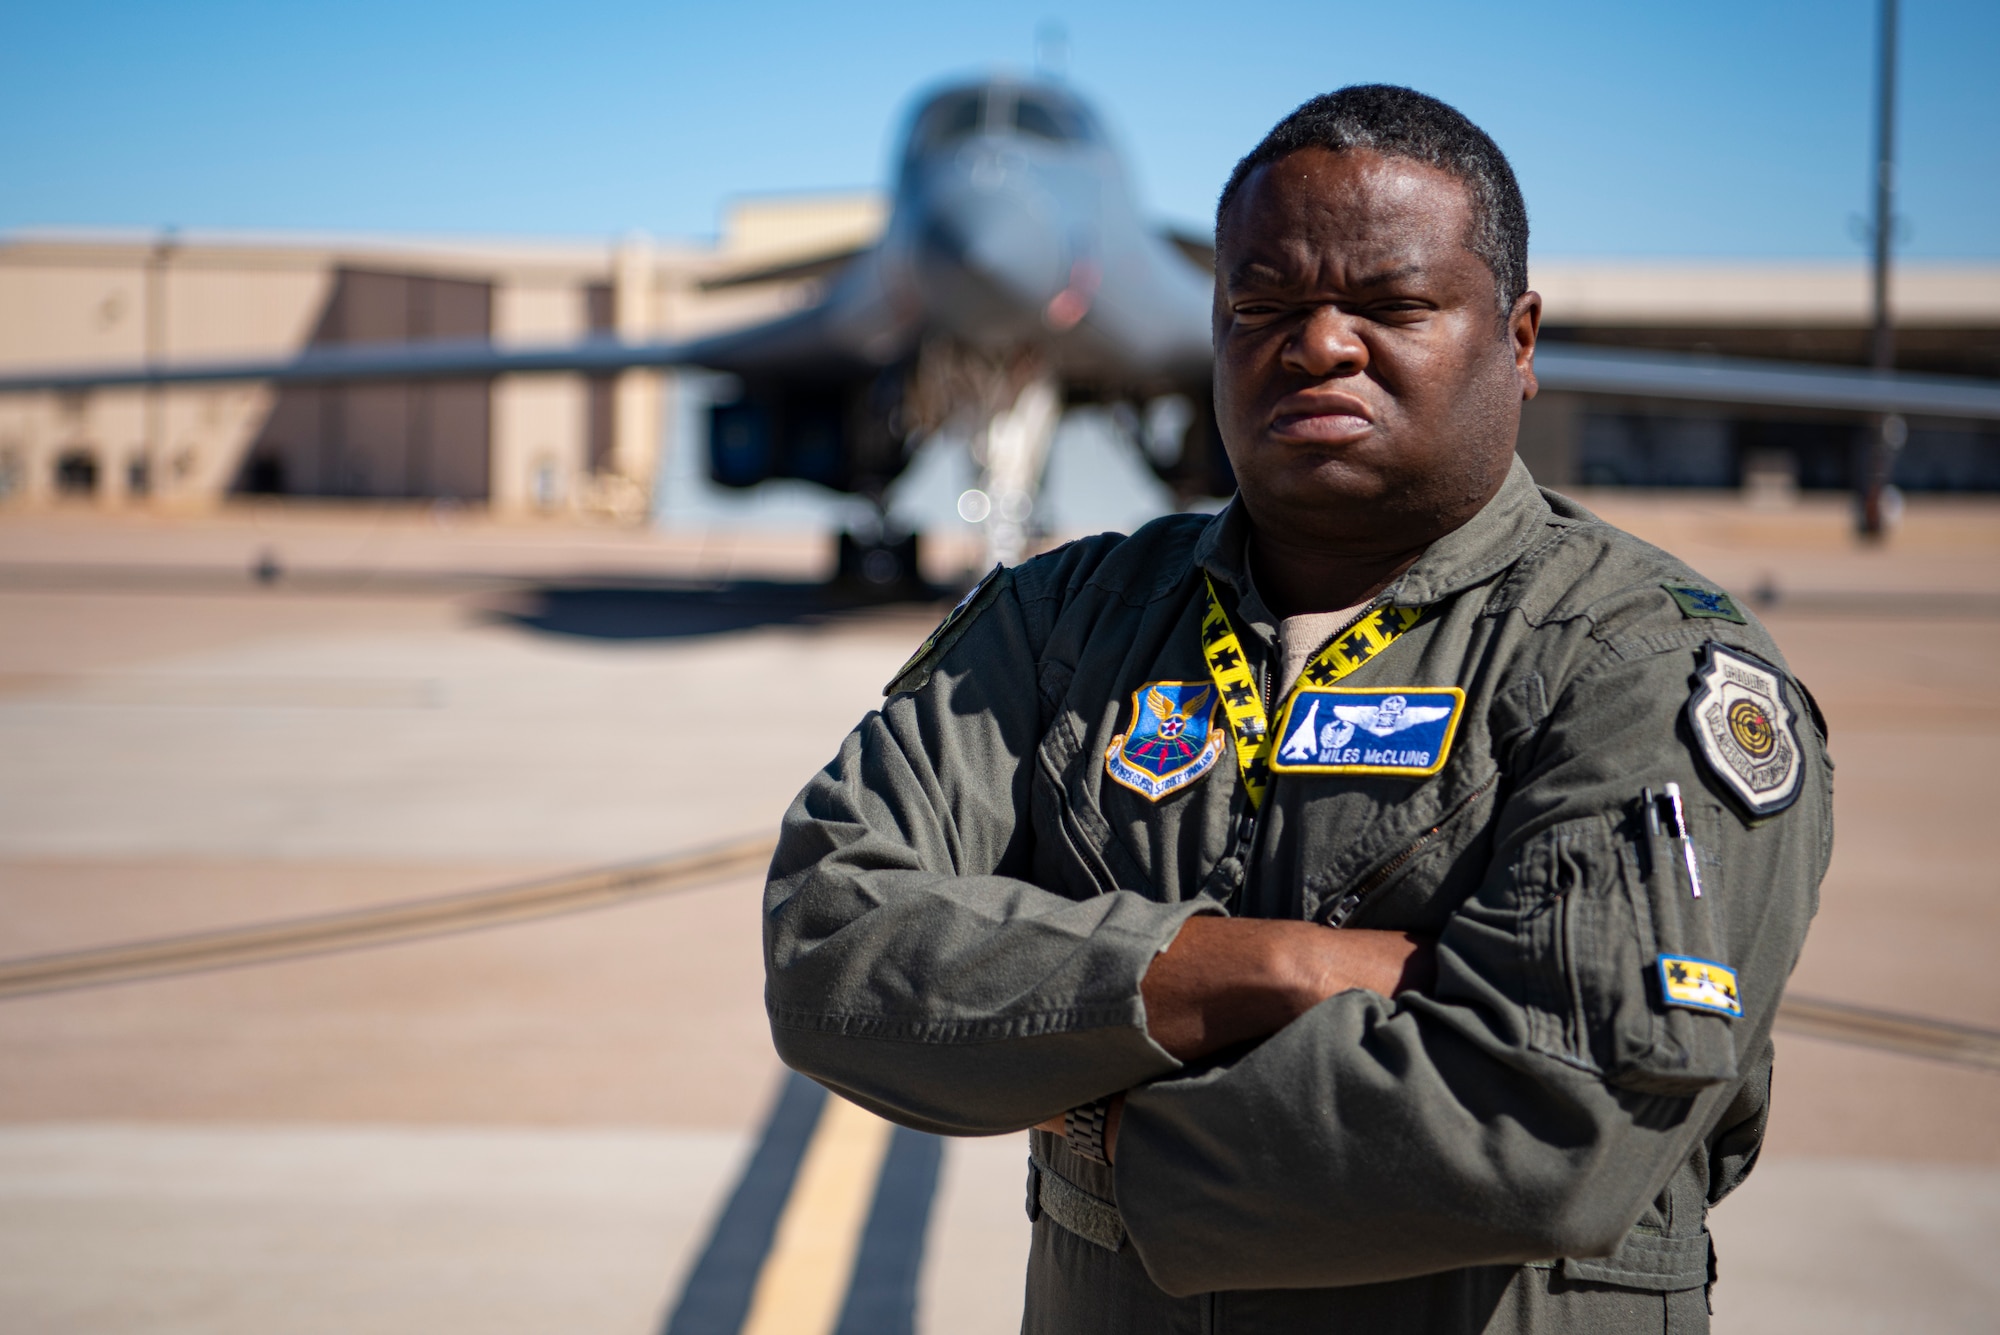 Col. J. Christopher “Miles” McClung, 7th Operations Group commander, poses for a photo in front of a B-1B Lancer at Dyess Air Force Base, Texas, Feb. 15, 2022. McClung was recognized during Black History Month for his central role in U.S. Air Force history for his and his family's service, as his brother served as an intelligence officer and his father served 23 years as a B-52 Stratofortress radar navigator. Thank you Col. McClung for being a part of what makes Team Dyess America's LIFT and STRIKE Base! (U.S. Air Force photo by Airman 1st Class Ryan Hayman)